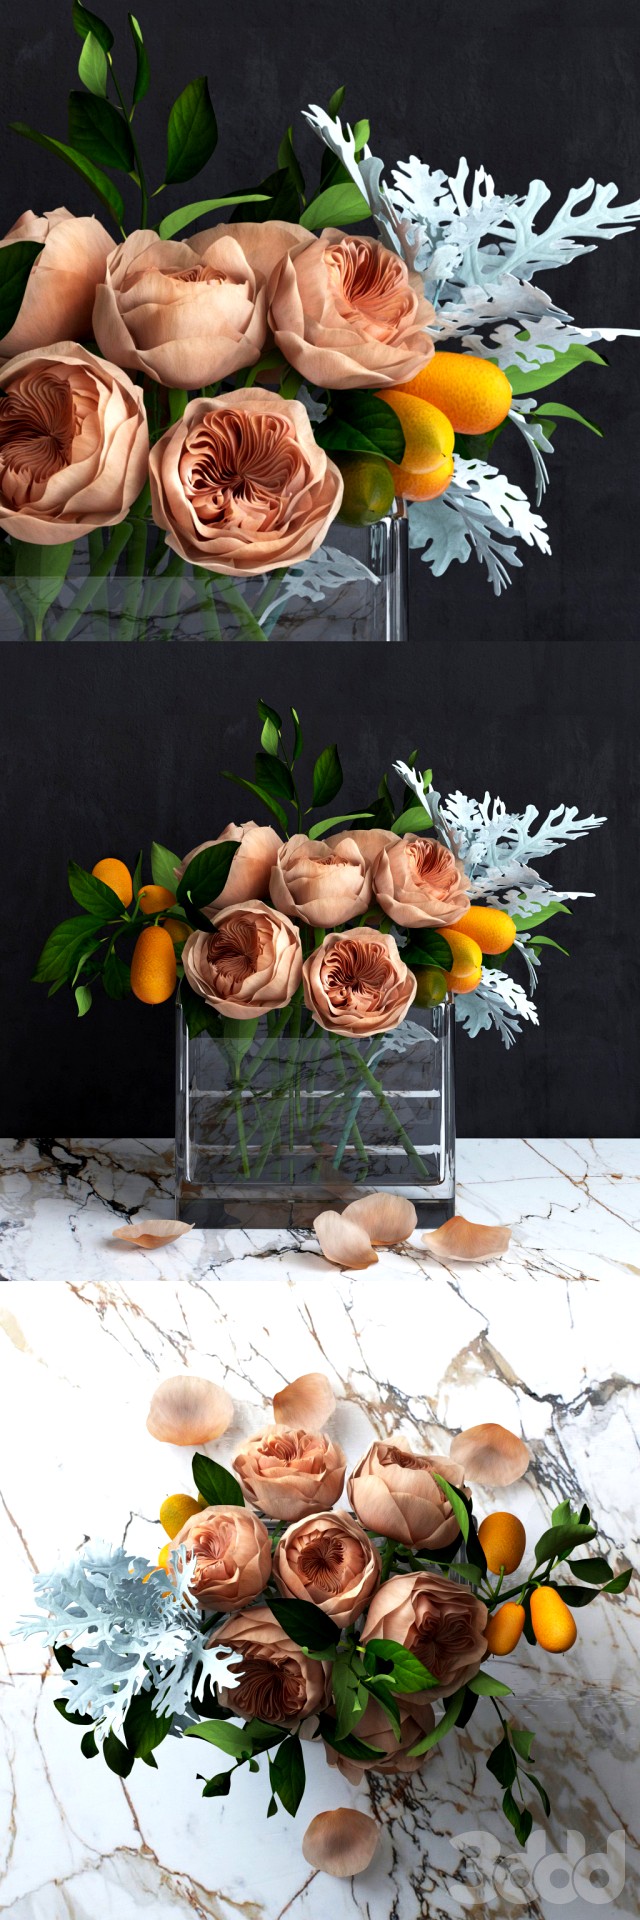 Bouquet of Austin&#039;s Roses, Kumquat and Dusty Miller plant